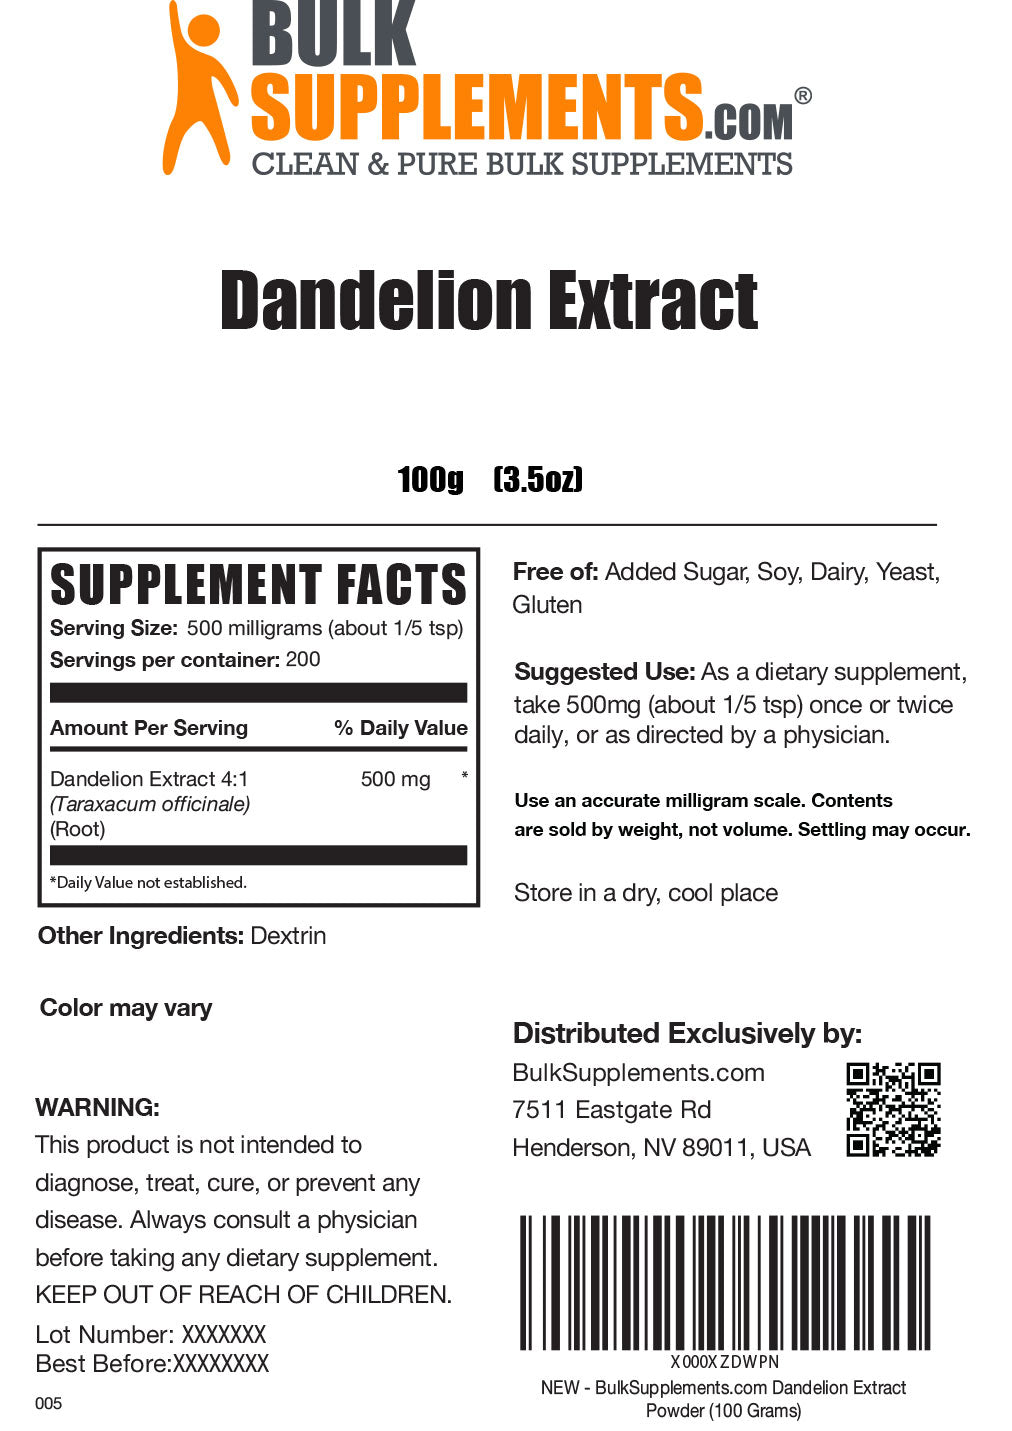 Supplement Facts for Dandelion Extract